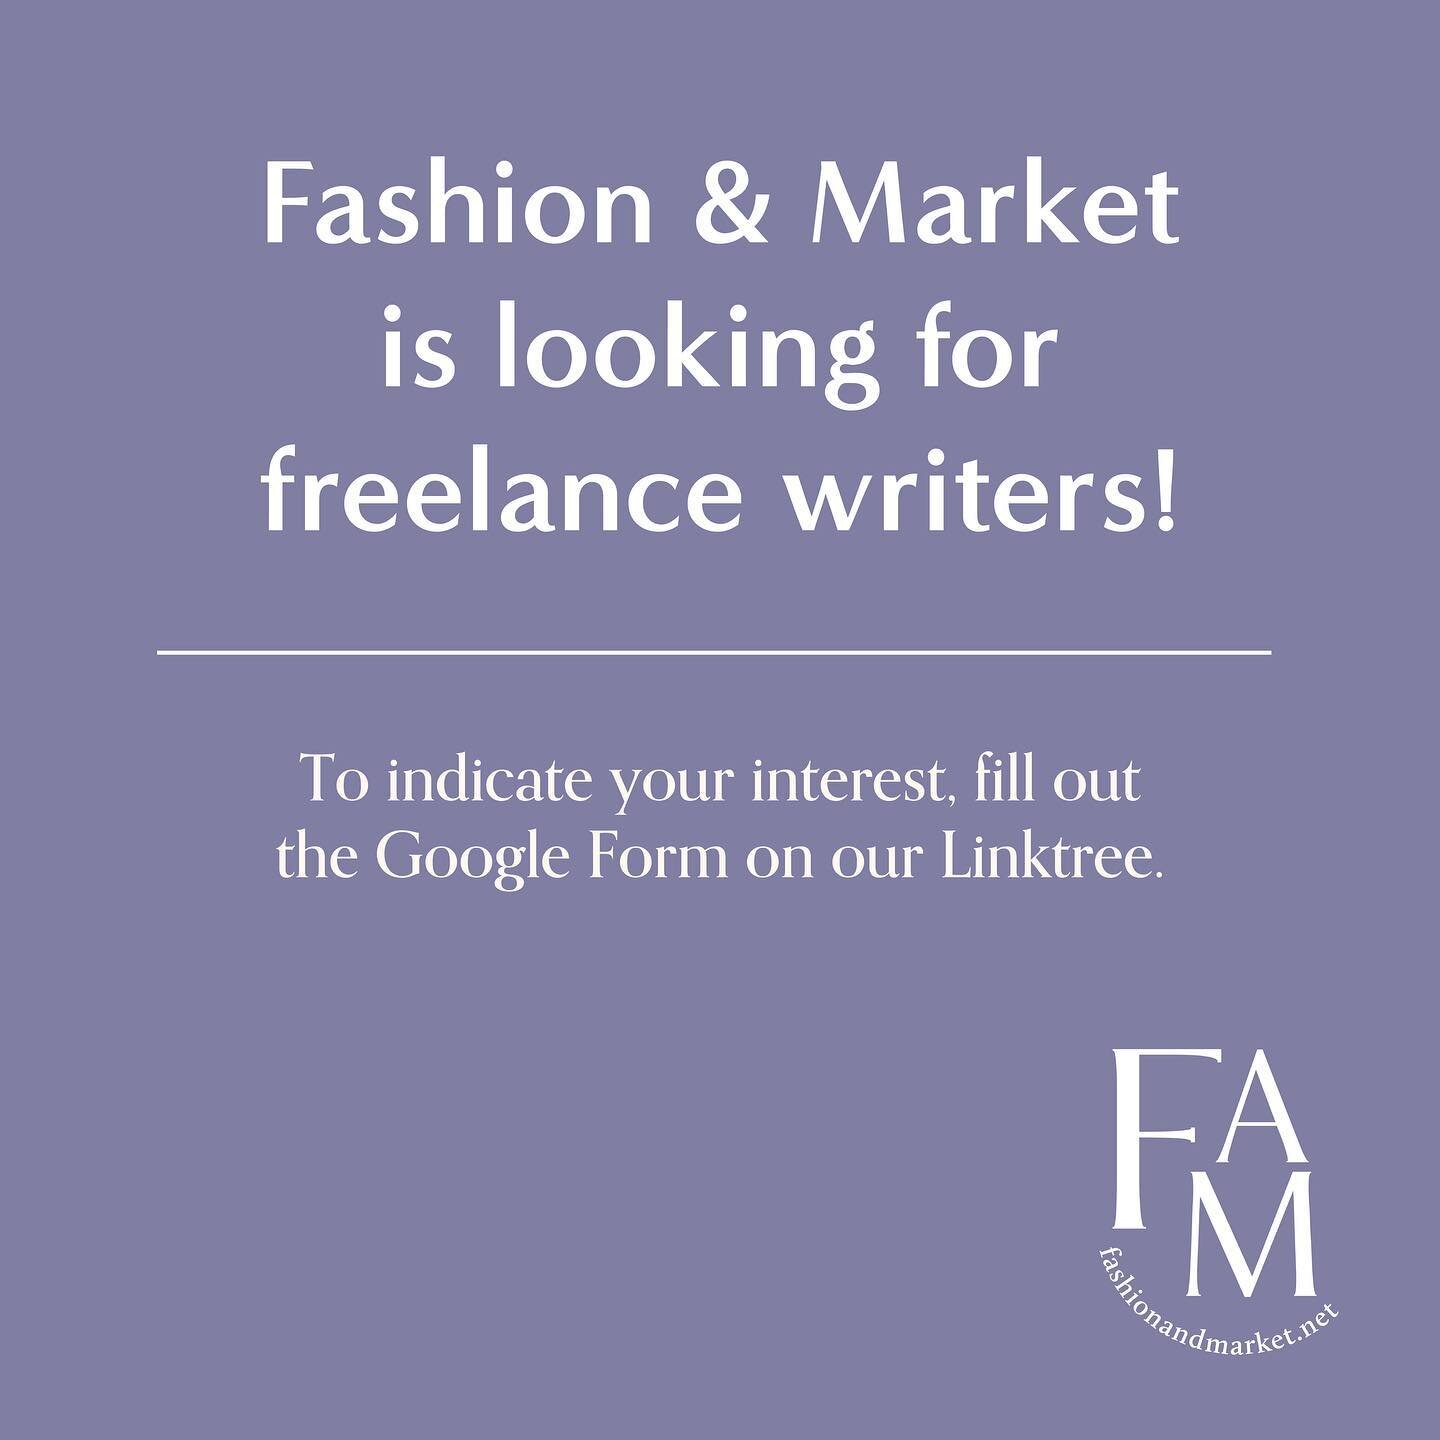 Fashion &amp; Market (FAM) is seeking freelance writers to write critically and/or creatively in response to the Southeast Asian fashion scene. If you would like to contribute content to one of FAM&rsquo;s categories, Dialogues, Material and Visual S